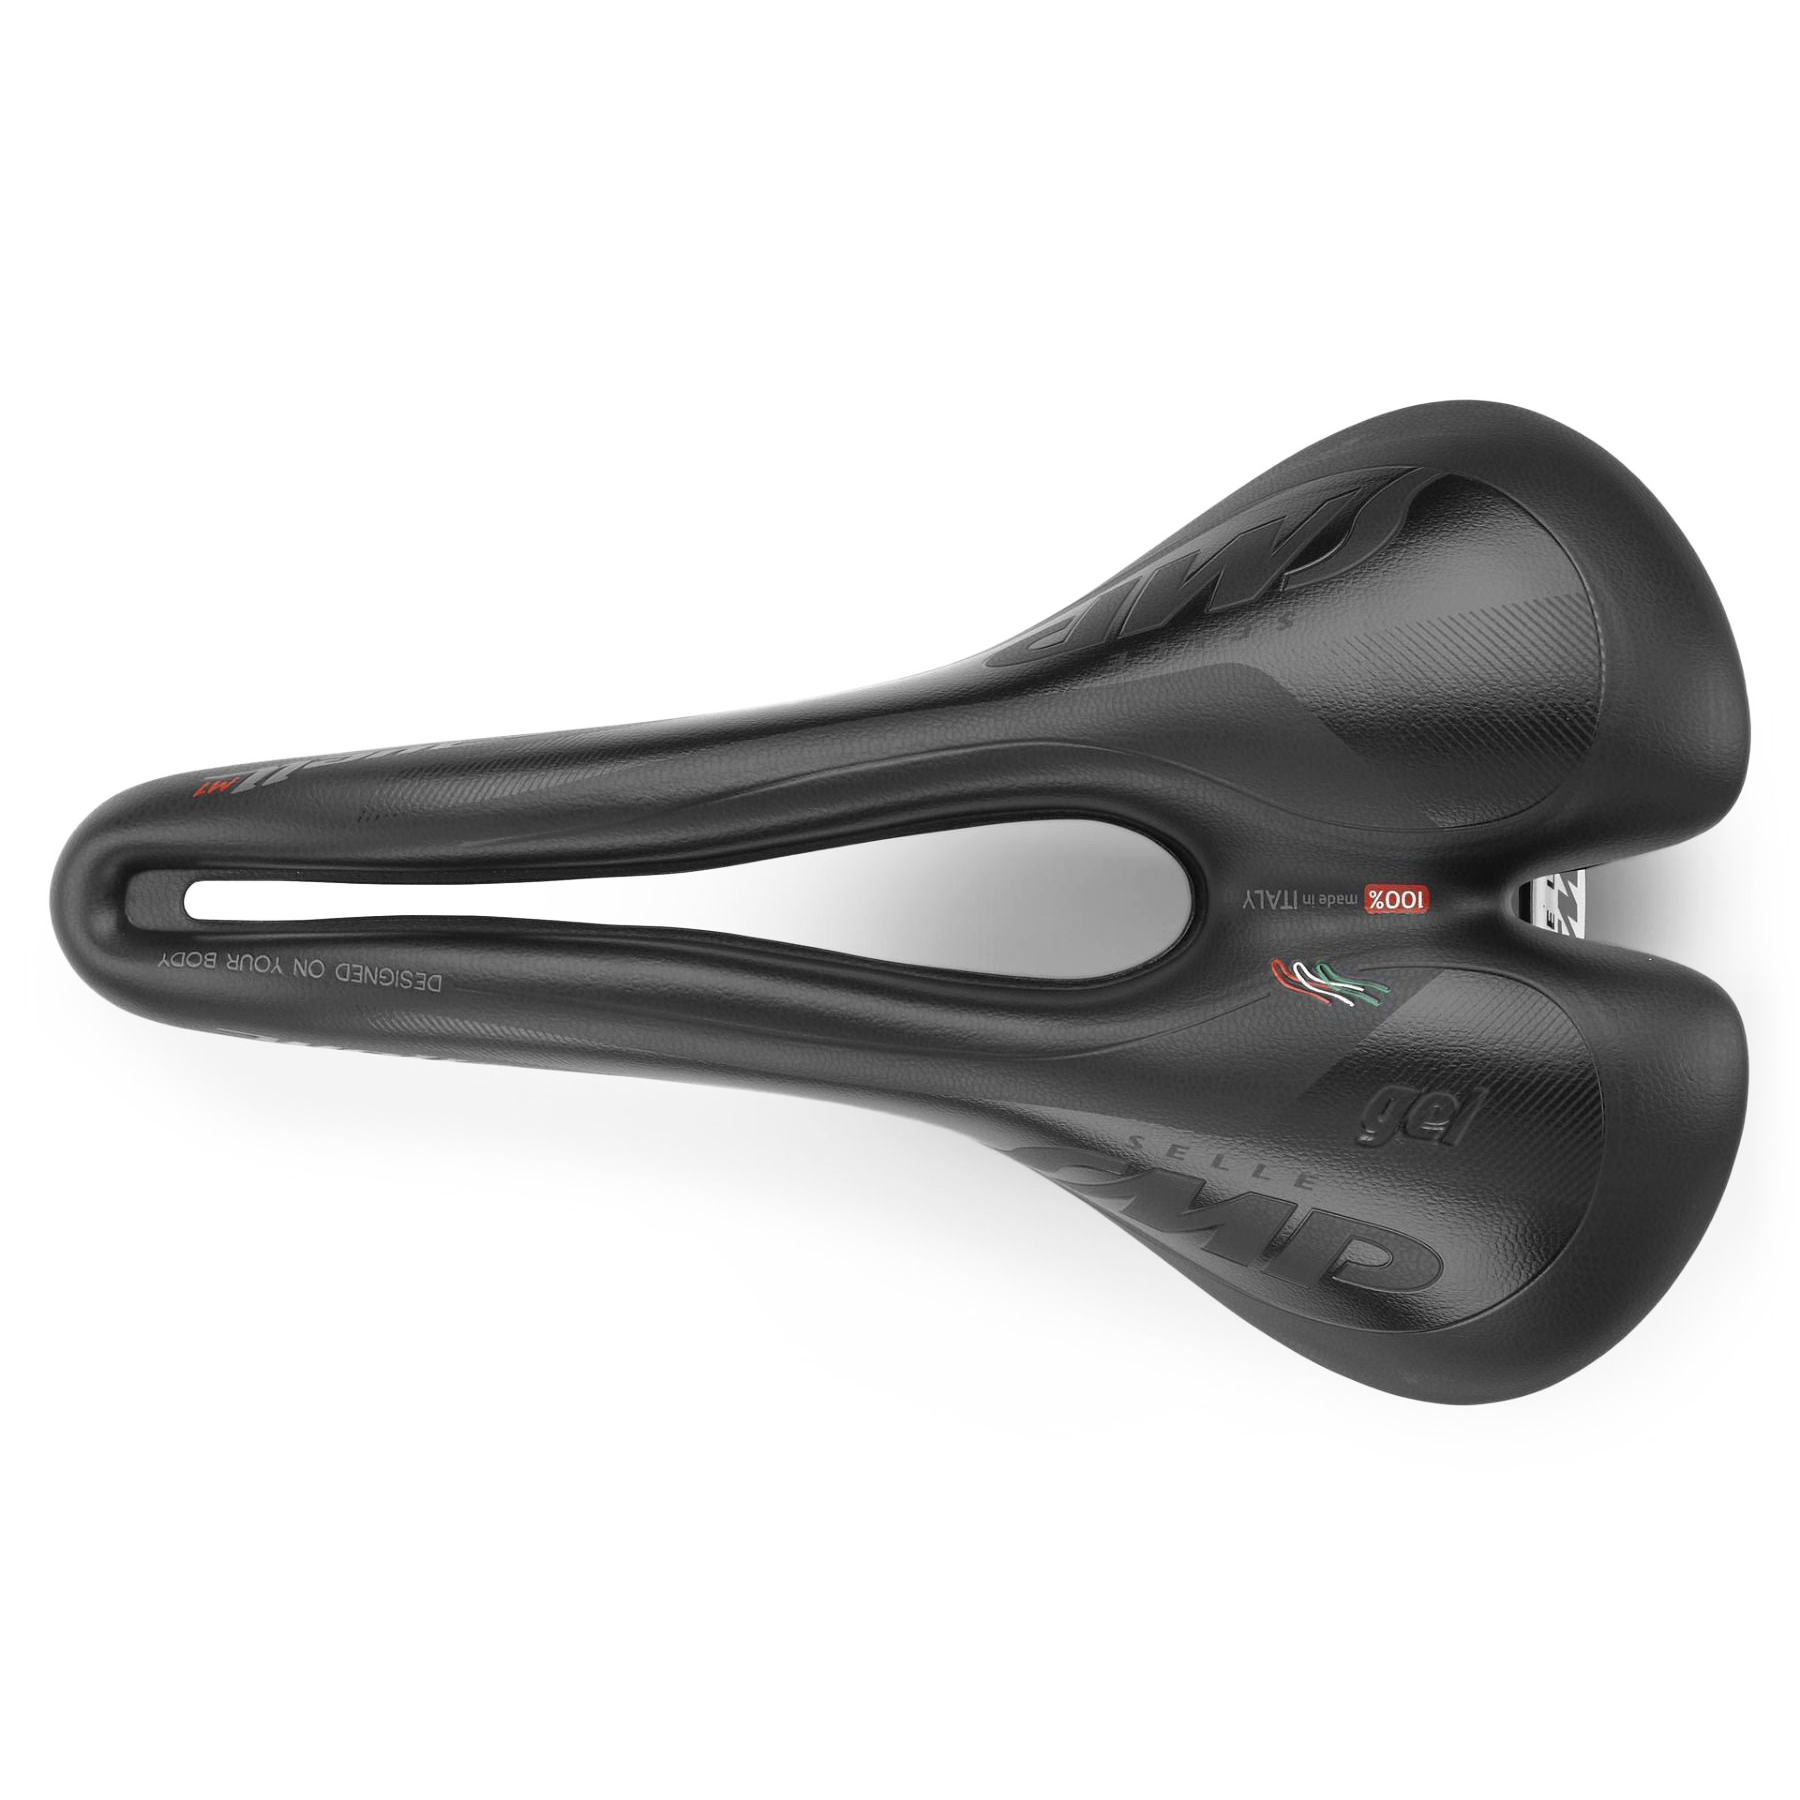 Picture of Selle SMP Well M1 Gel Saddle - black